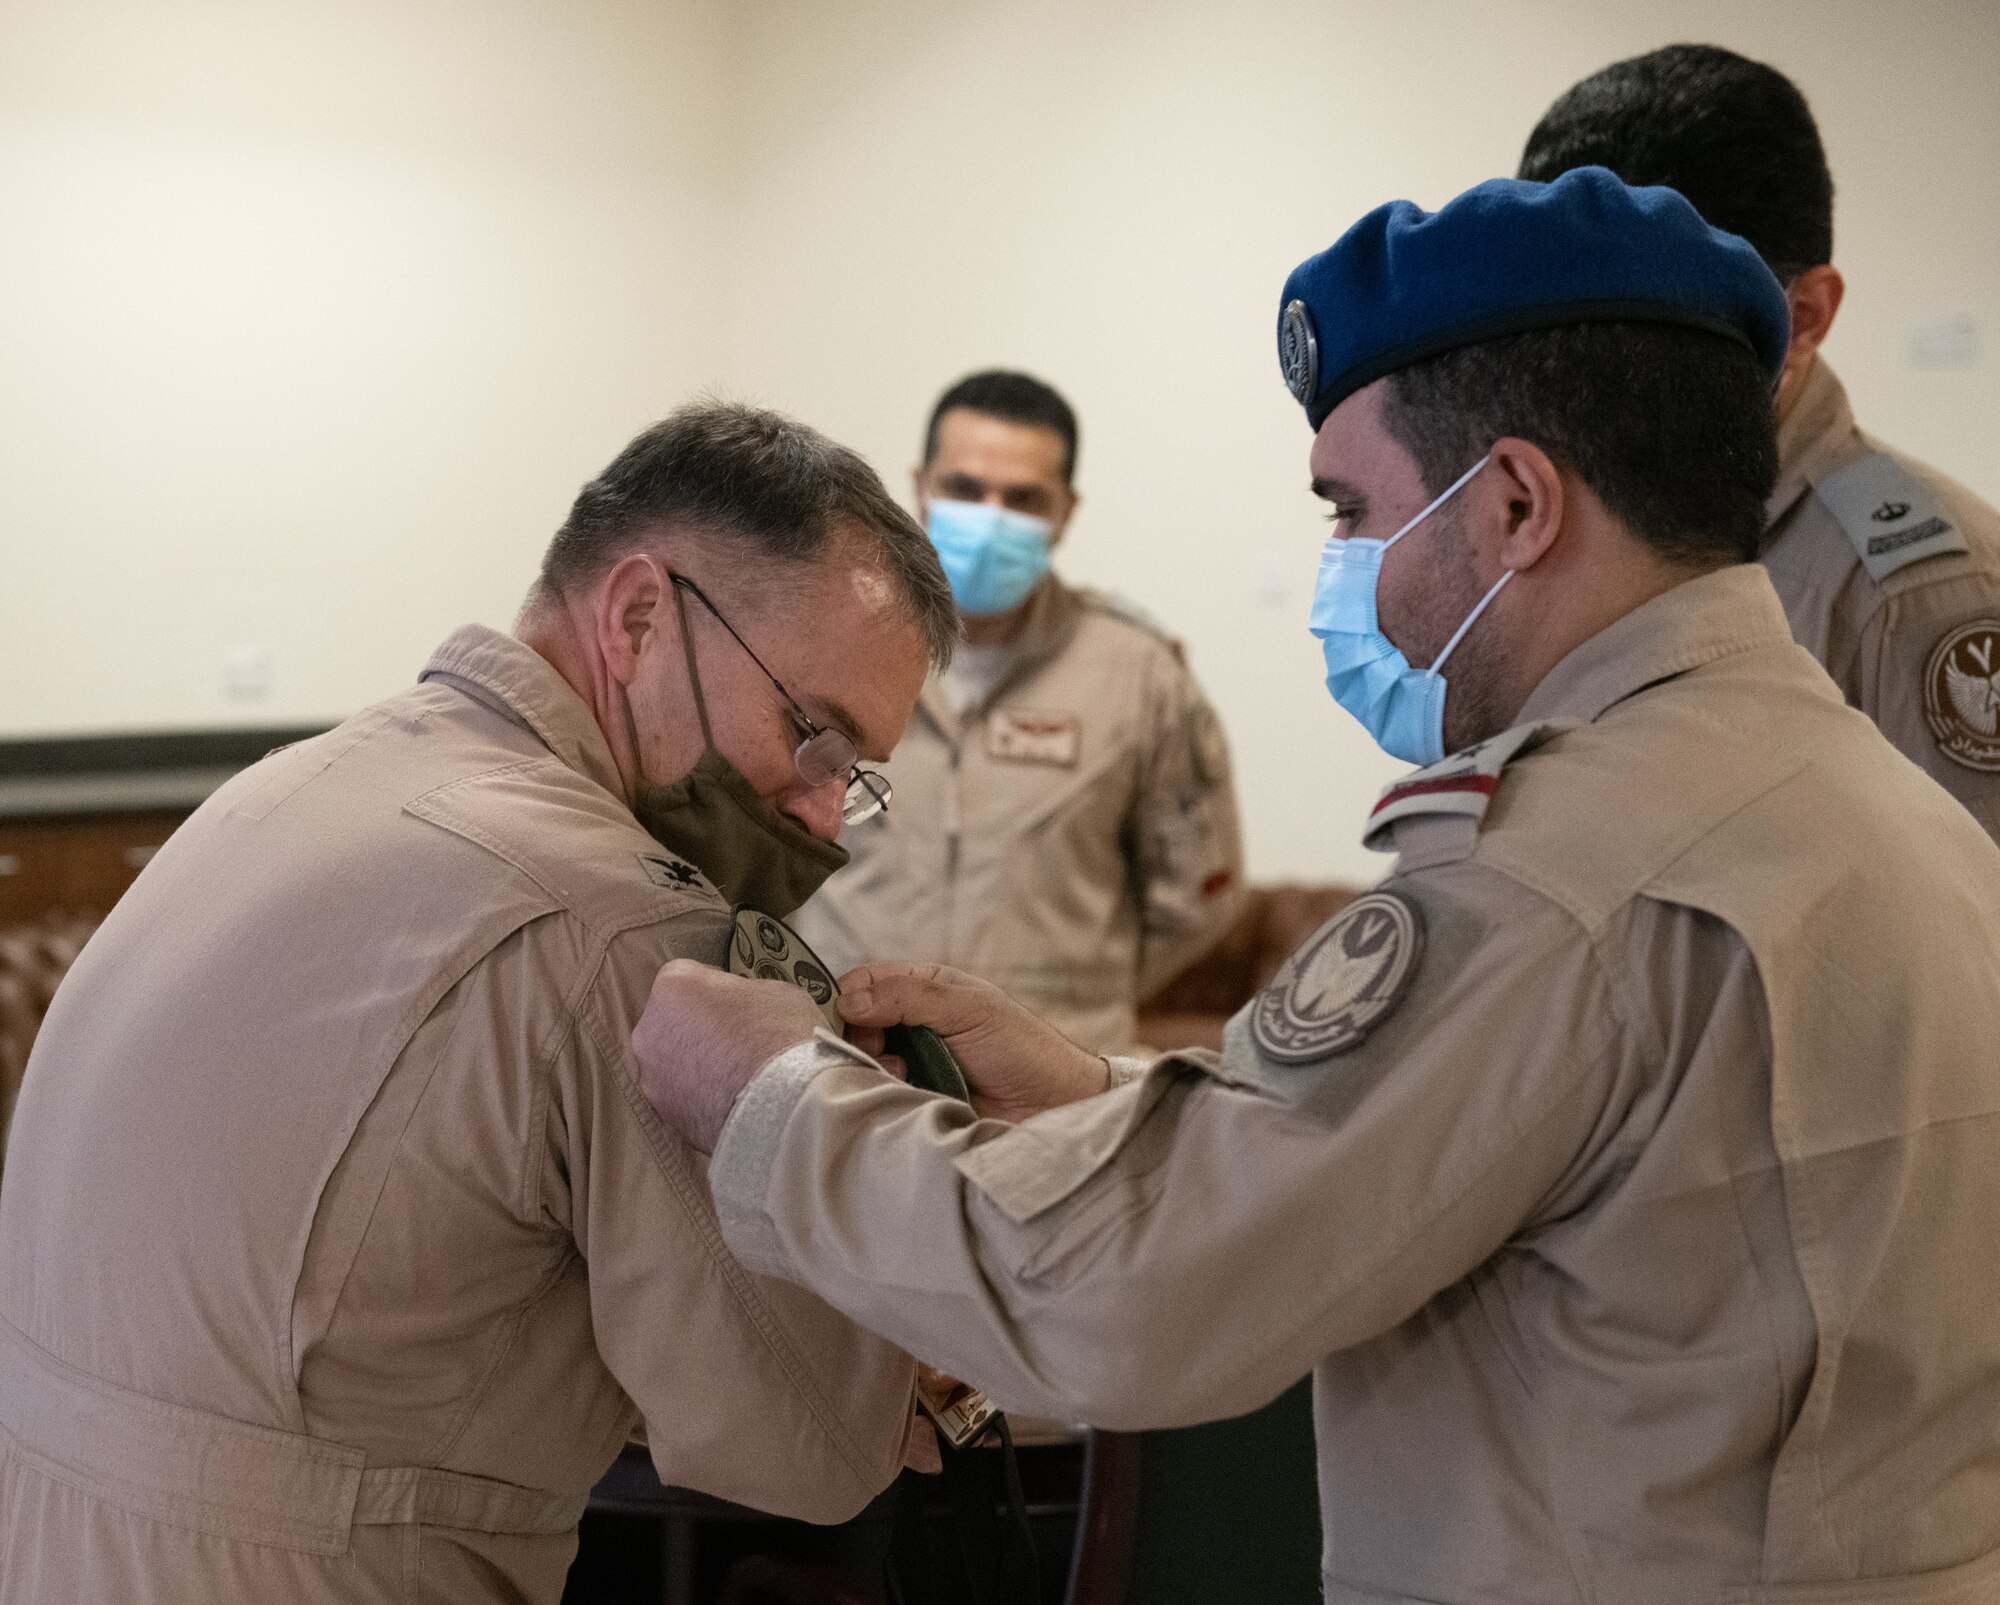 A member of the Royal Saudi Air Force places a patch on Col. Ciero, 378th Air Expeditionary Wing vice commander, Dec. 1, 2020, at King Faisal Air Base, Kingdom of Saudi Arabia.